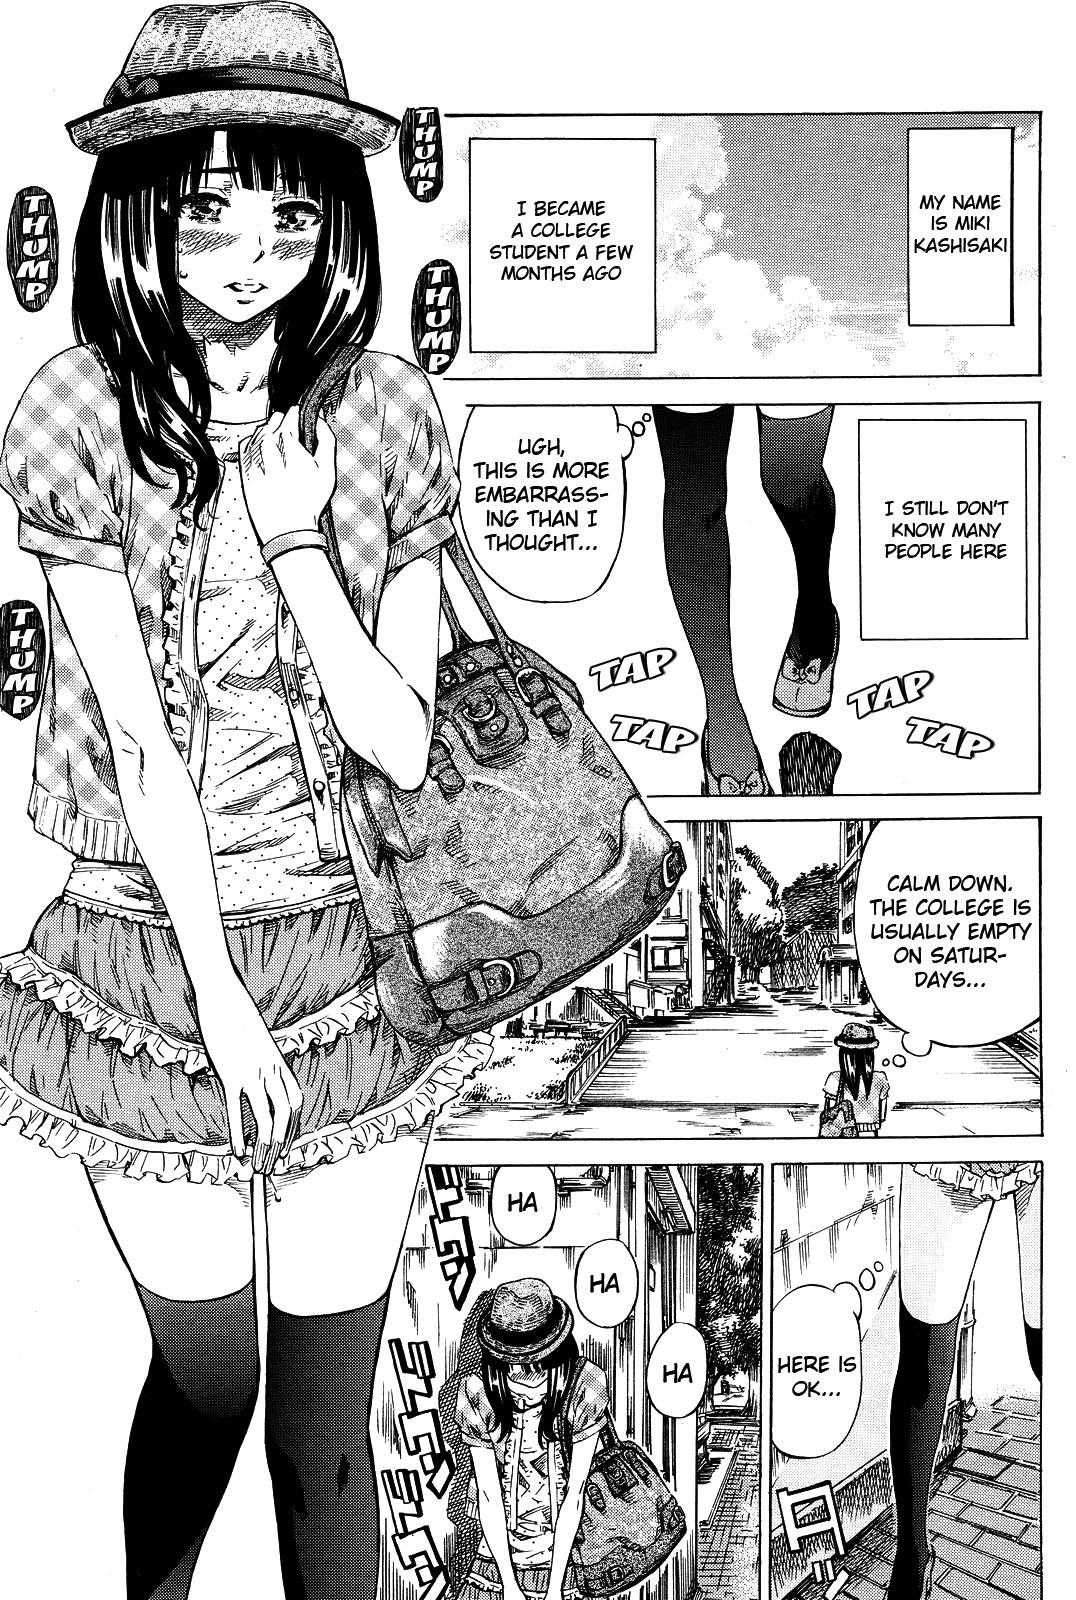 Exhibitionist College Girl Series - Chapter 1 0